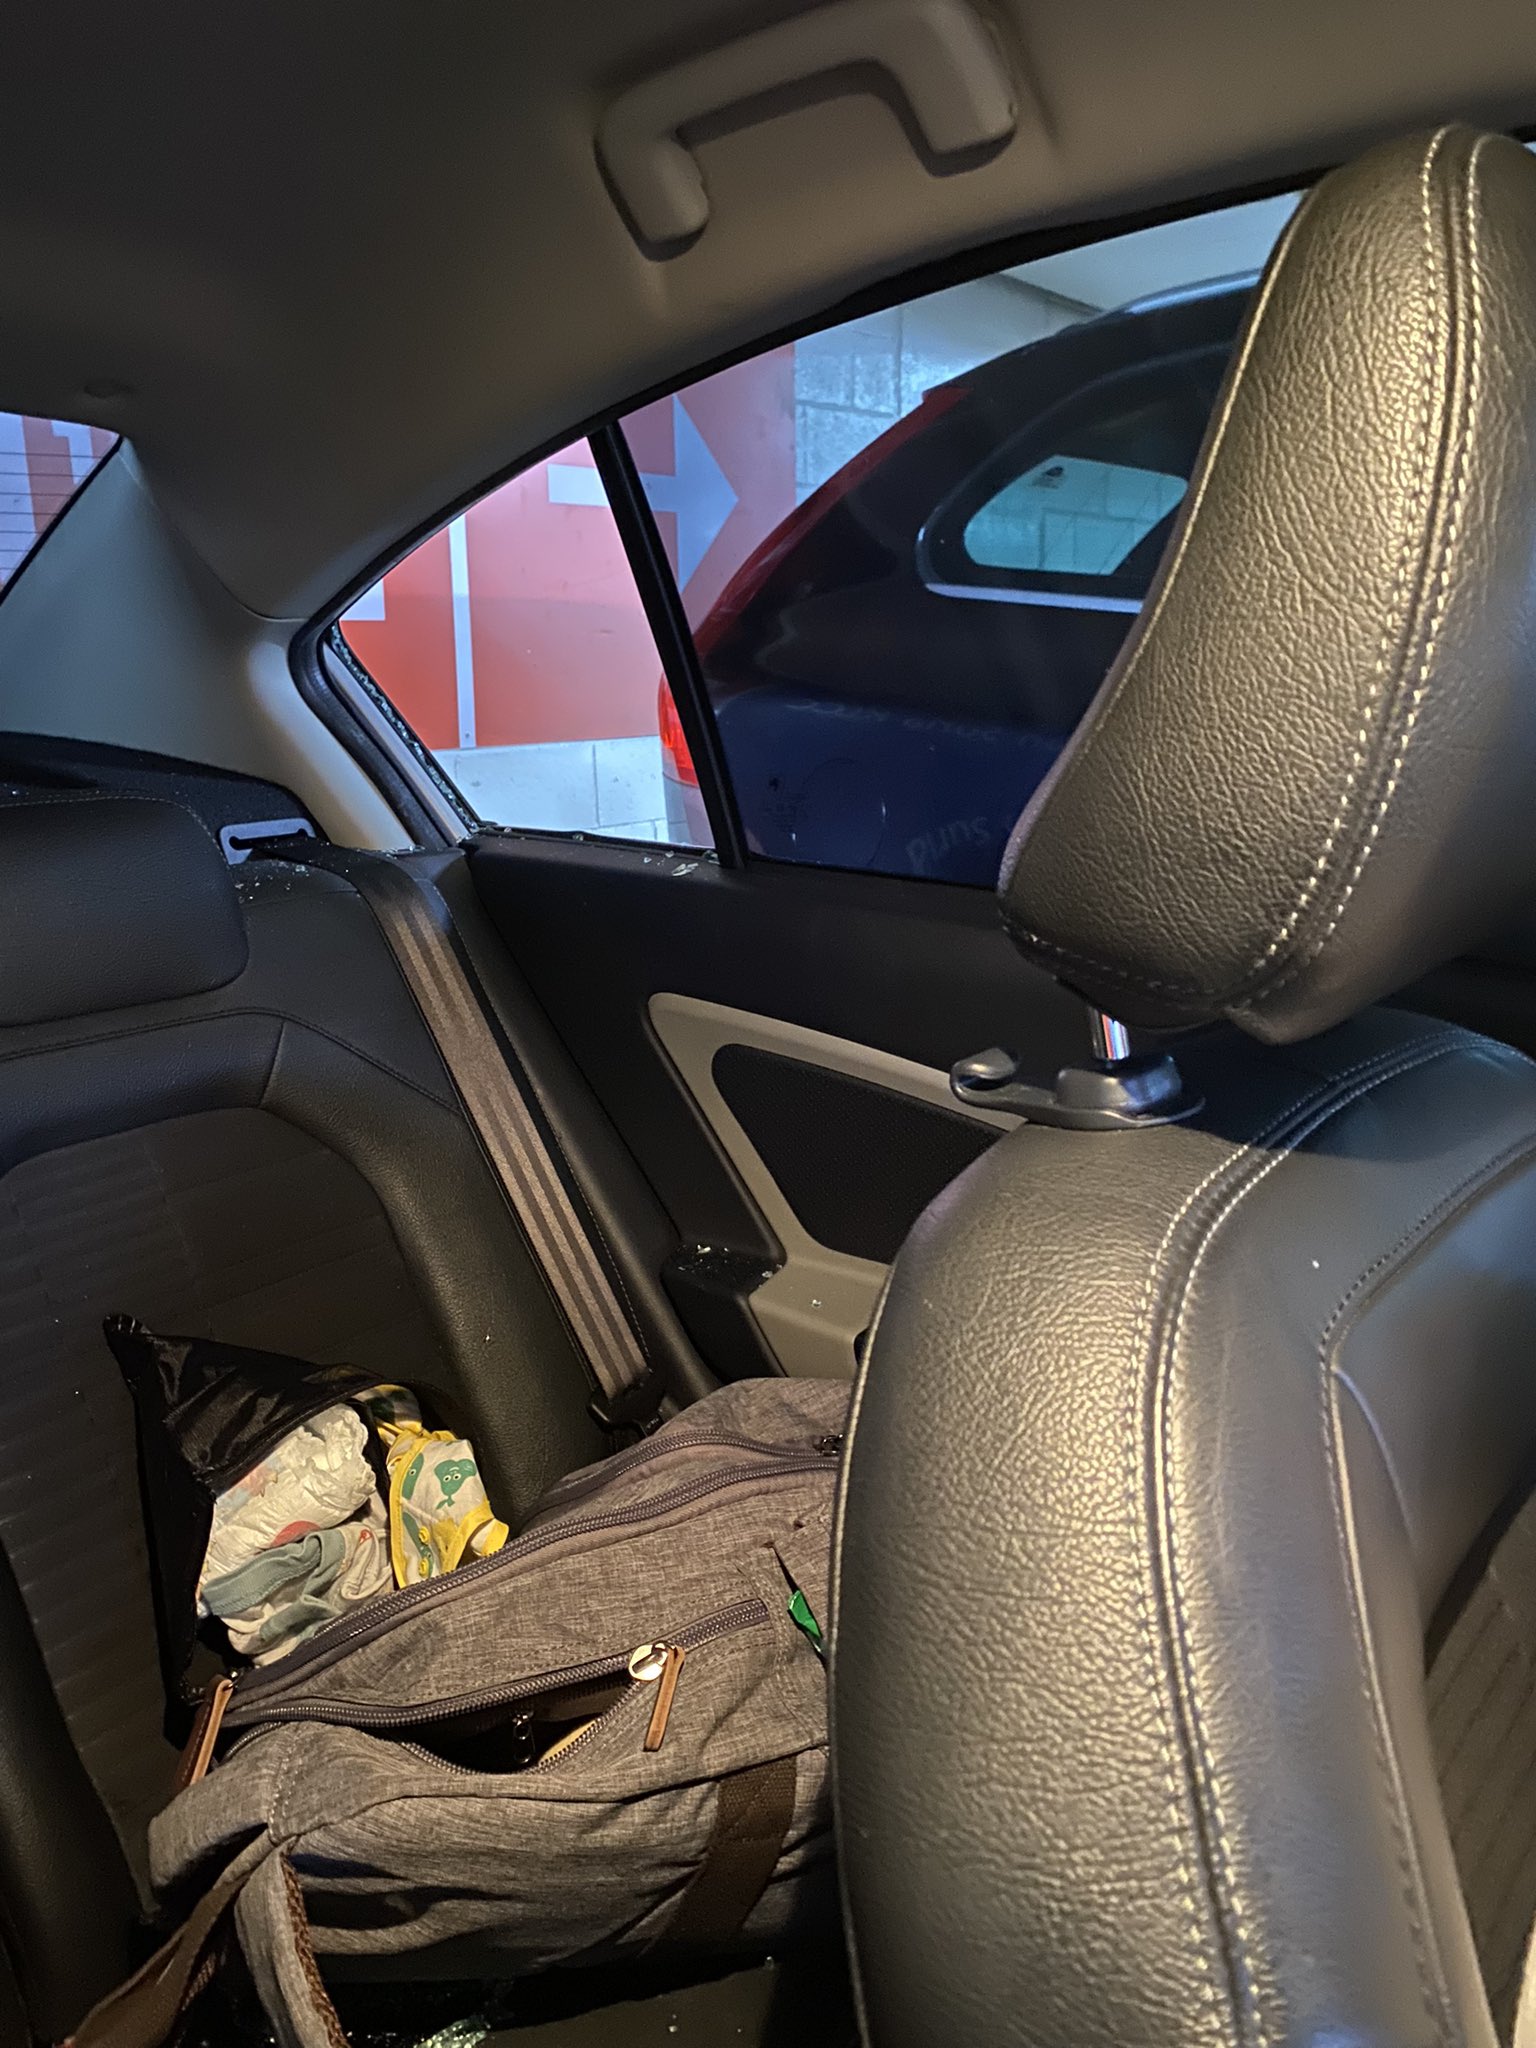 The thief had ransacked through his son's diaper bag, which was left in the backseat. Image credit: @irfannhaziq_